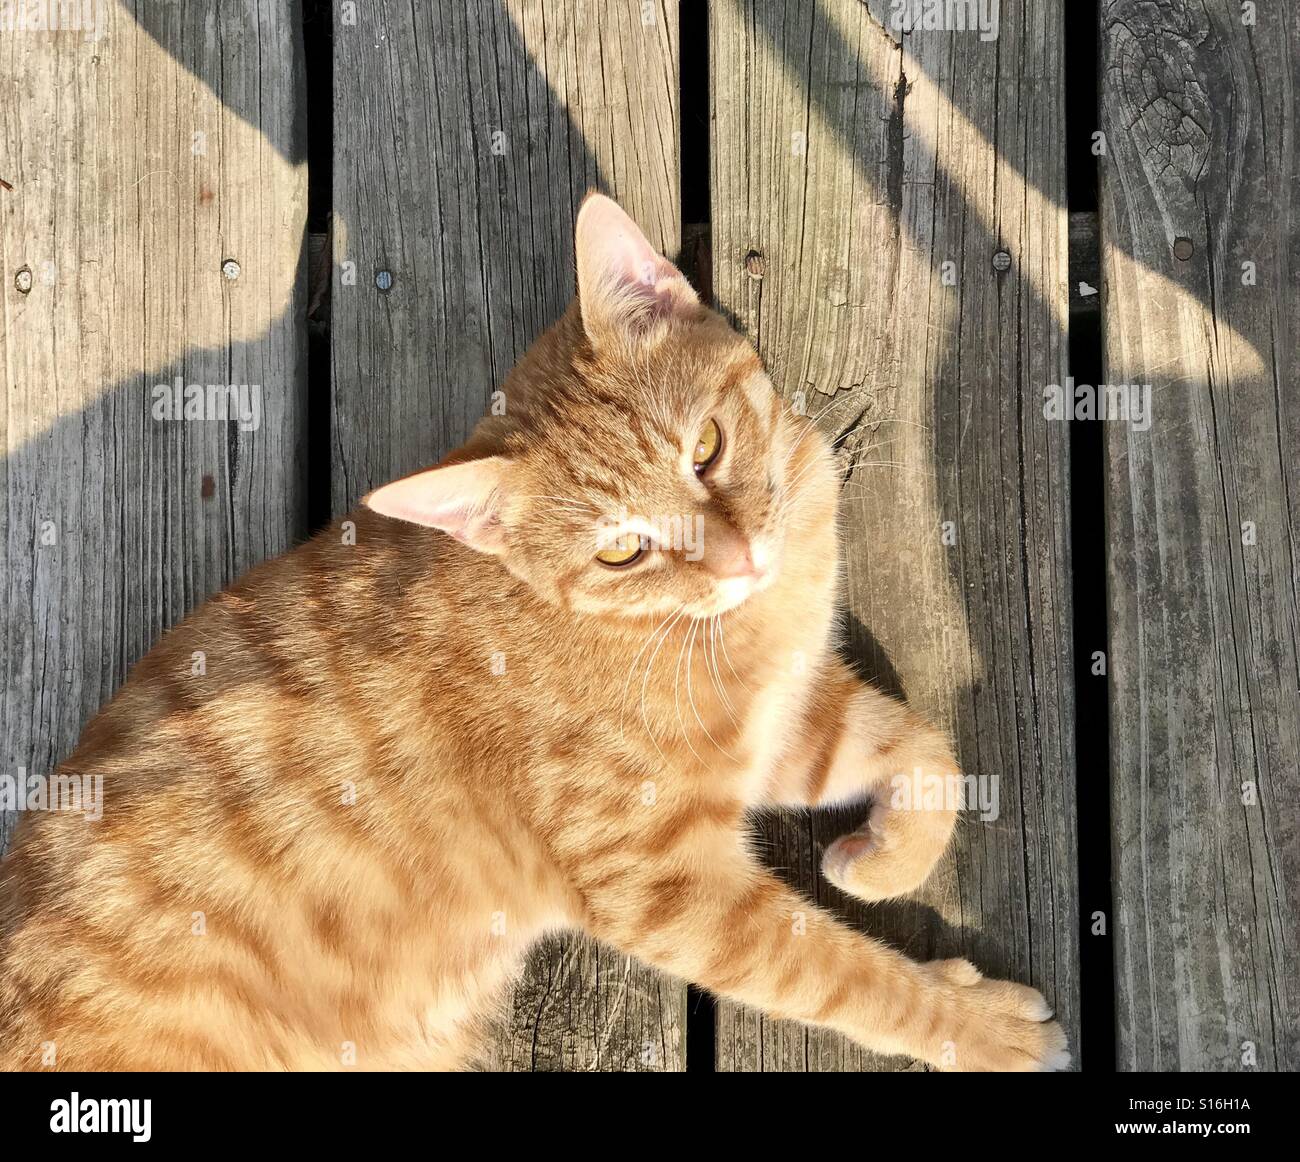 Orange or ginger tabby cat approximate year-and-one-half old relaxing and having warm fuzzies in sunshine on outdoor wooden deck Stock Photo